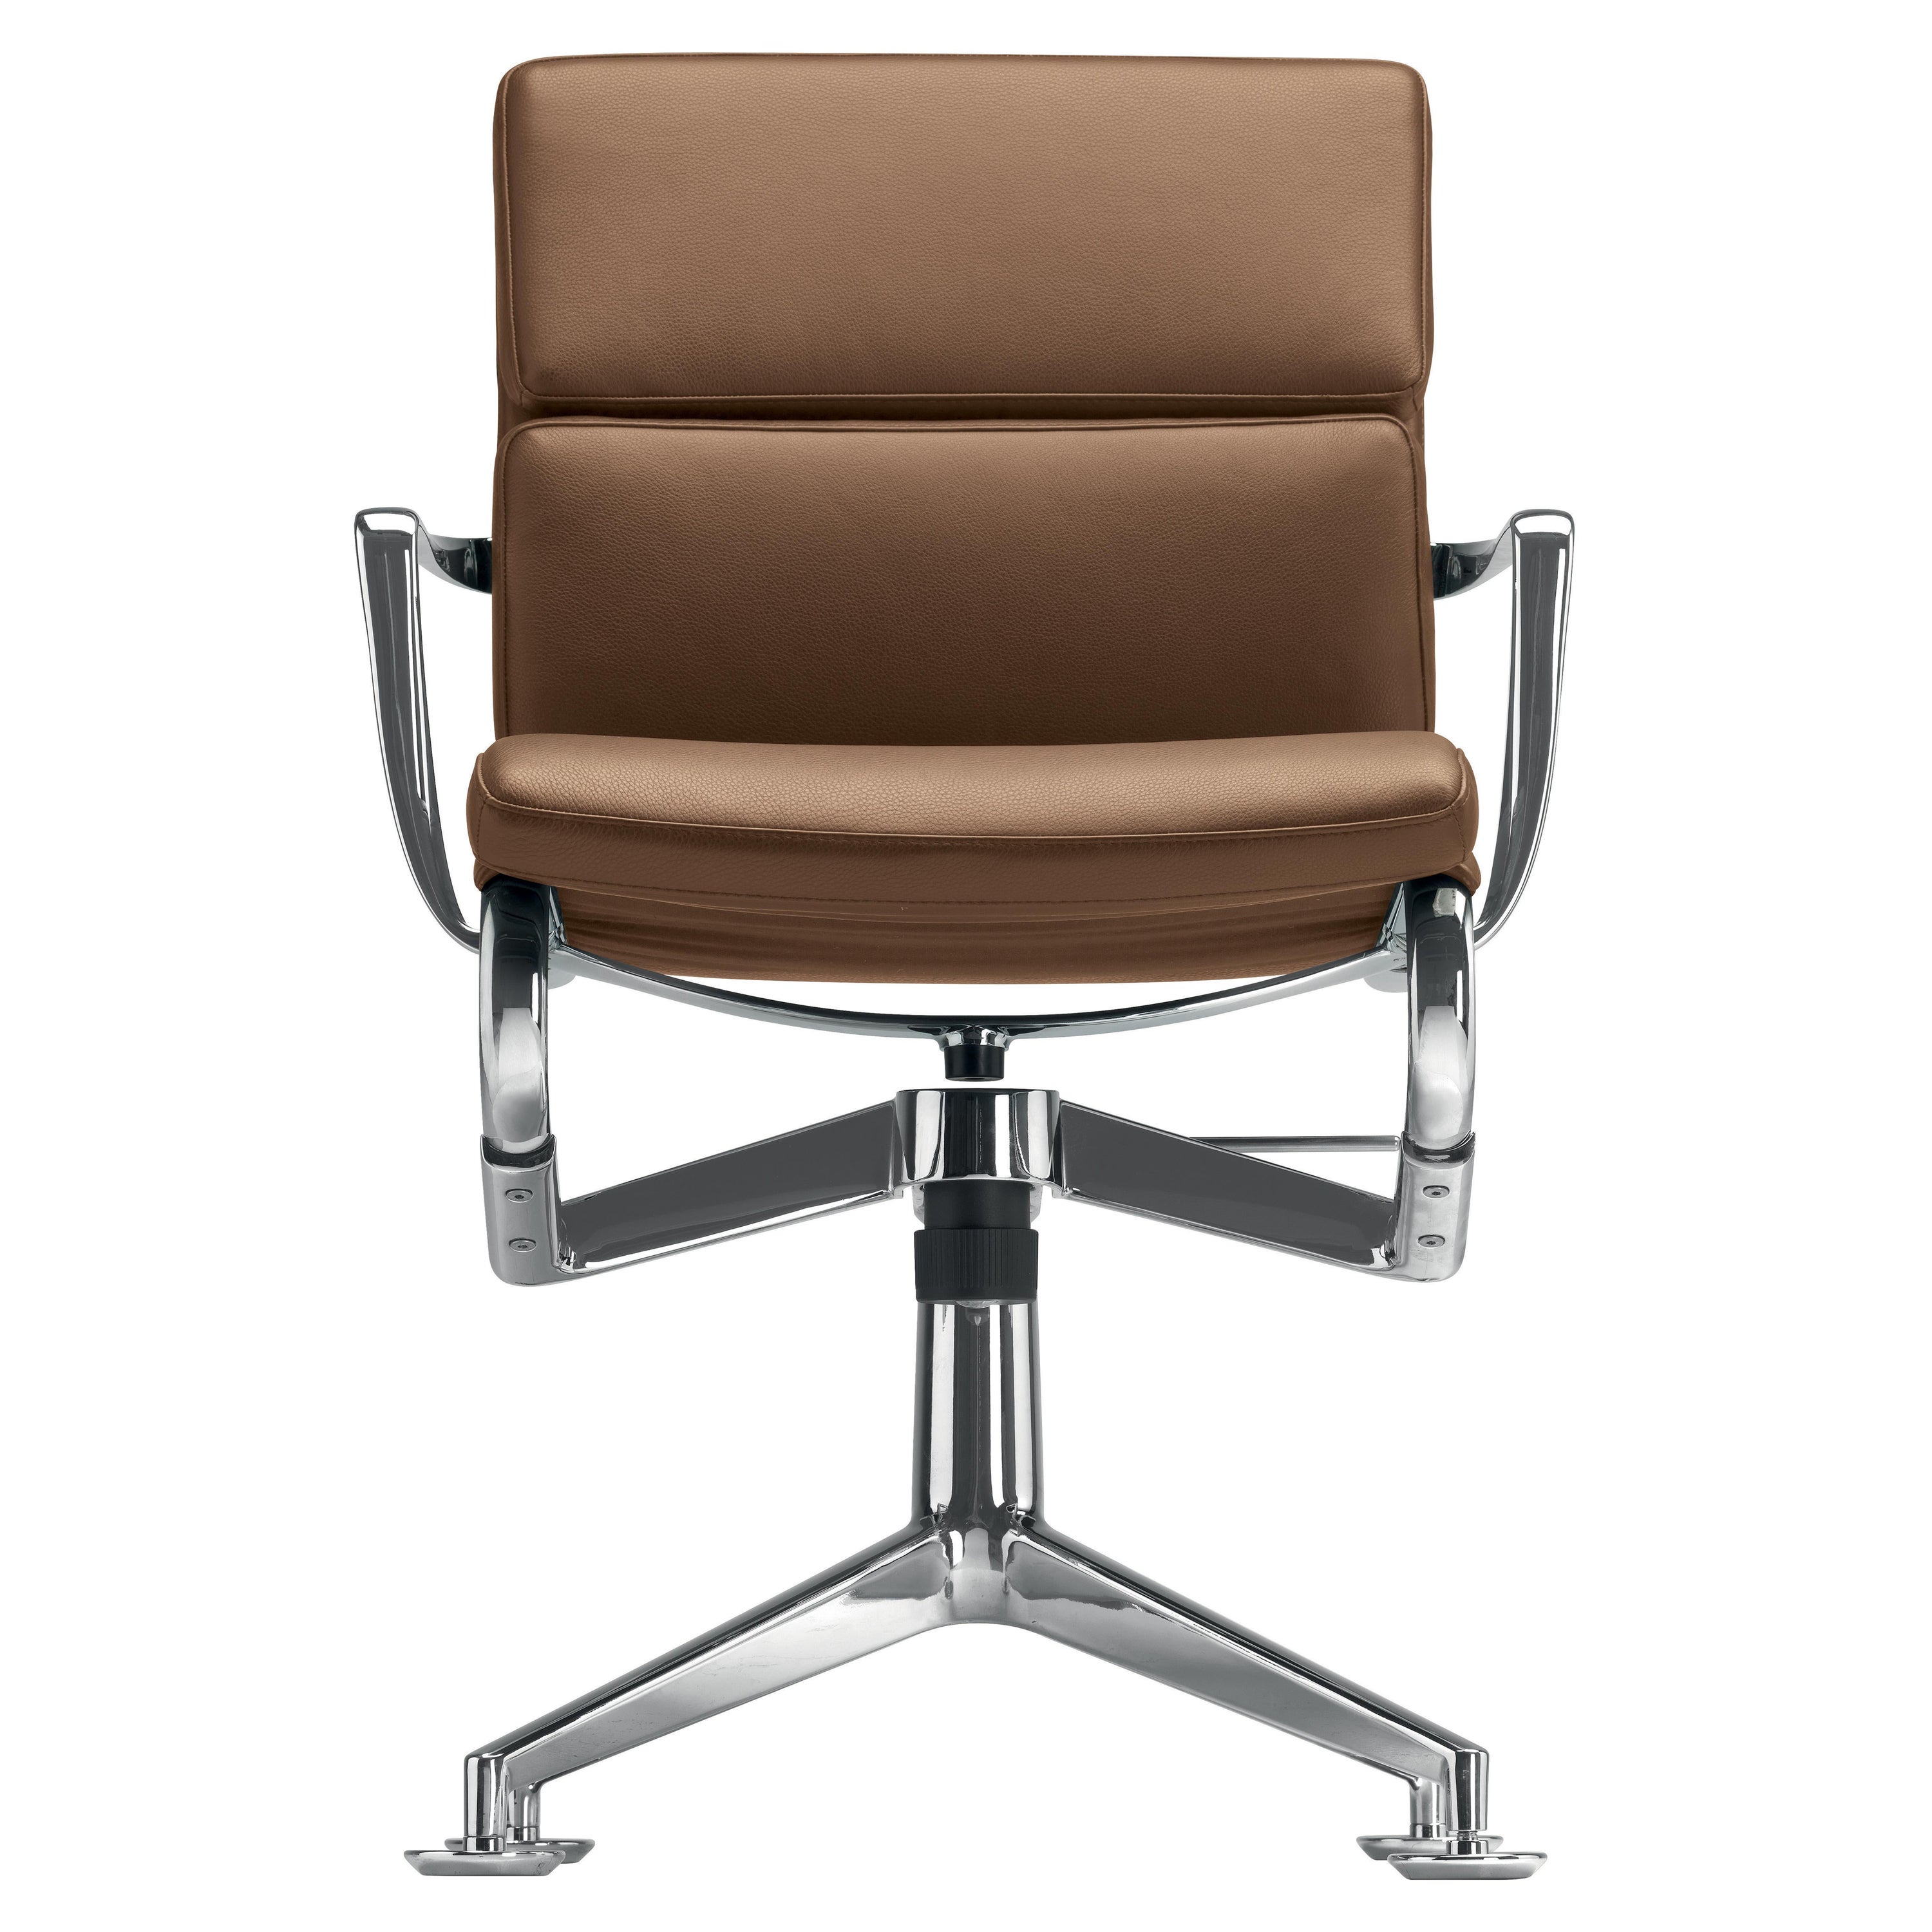 Alias 429 Meetingframe+ Tilt 47 Soft Chair in Brown Siena Seat and Chromed Frame For Sale